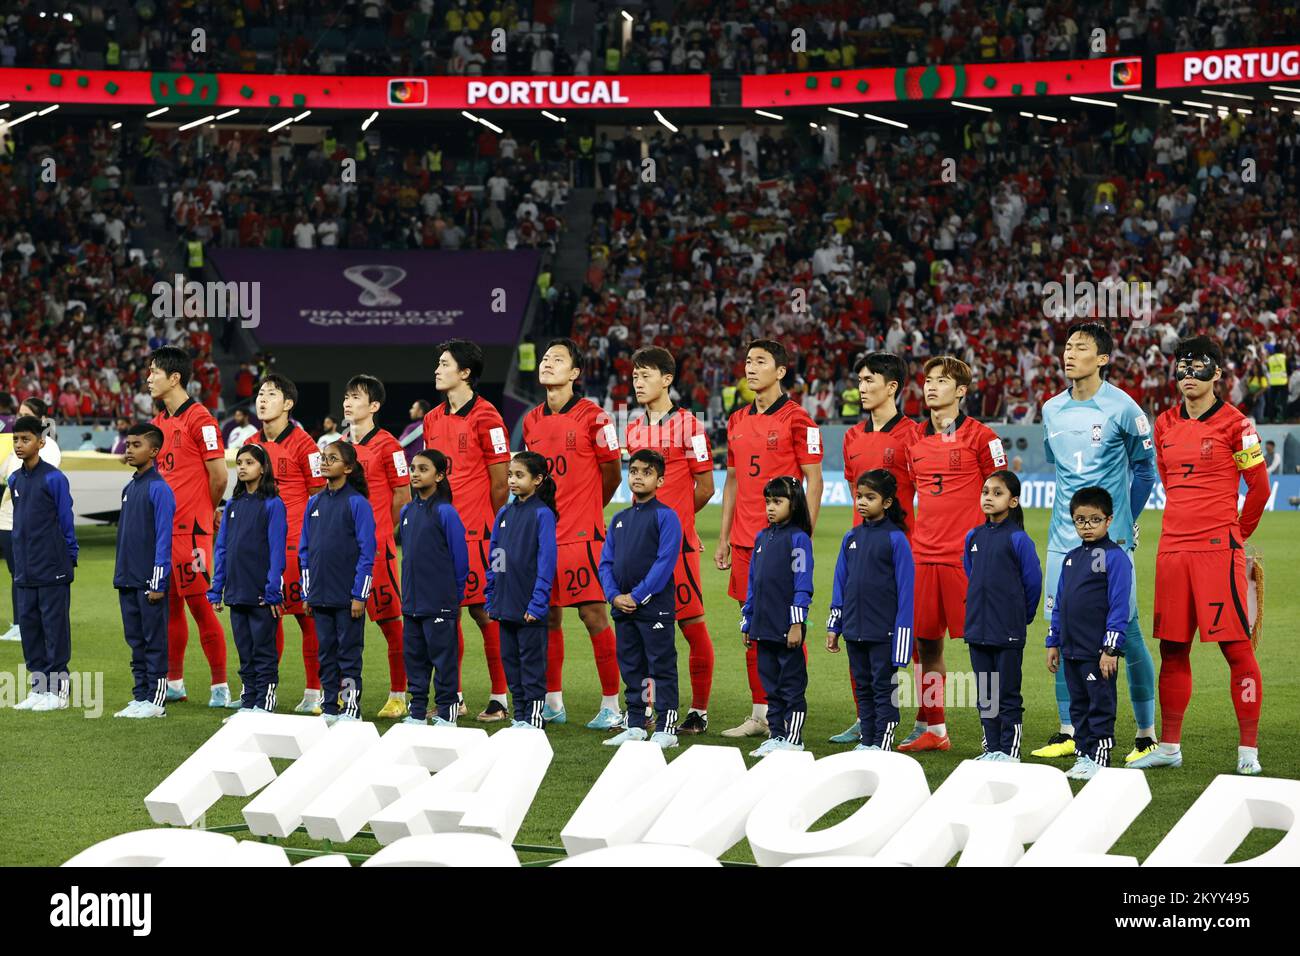 Qatar. 02nd Dec, 2022. DOHA - Young-gwon Kim of Korea Republic, Woo-young Jung of Korea Republic, Kyung-won Kwon of Korea Republic, Gue-sung Cho of Korea Republic, Korea Republic goalkeeper Seung-Gyu Kim, Heung-min Son of Korea Republic, Kang-in Lee of Korea Republic, Moon-hwan Kim of Korea Republic, Jae-sung Lee of Korea Republic, Jin-Su Kim of Korea Republic during the FIFA World Cup Qatar 2022 group H match between South Korea and Portugal in Education City Stadium on December 2, 2022 in Doha, Qatar. AP | Dutch Height | MAURICE OF STONE Credit: ANP/Alamy Live News Stock Photo